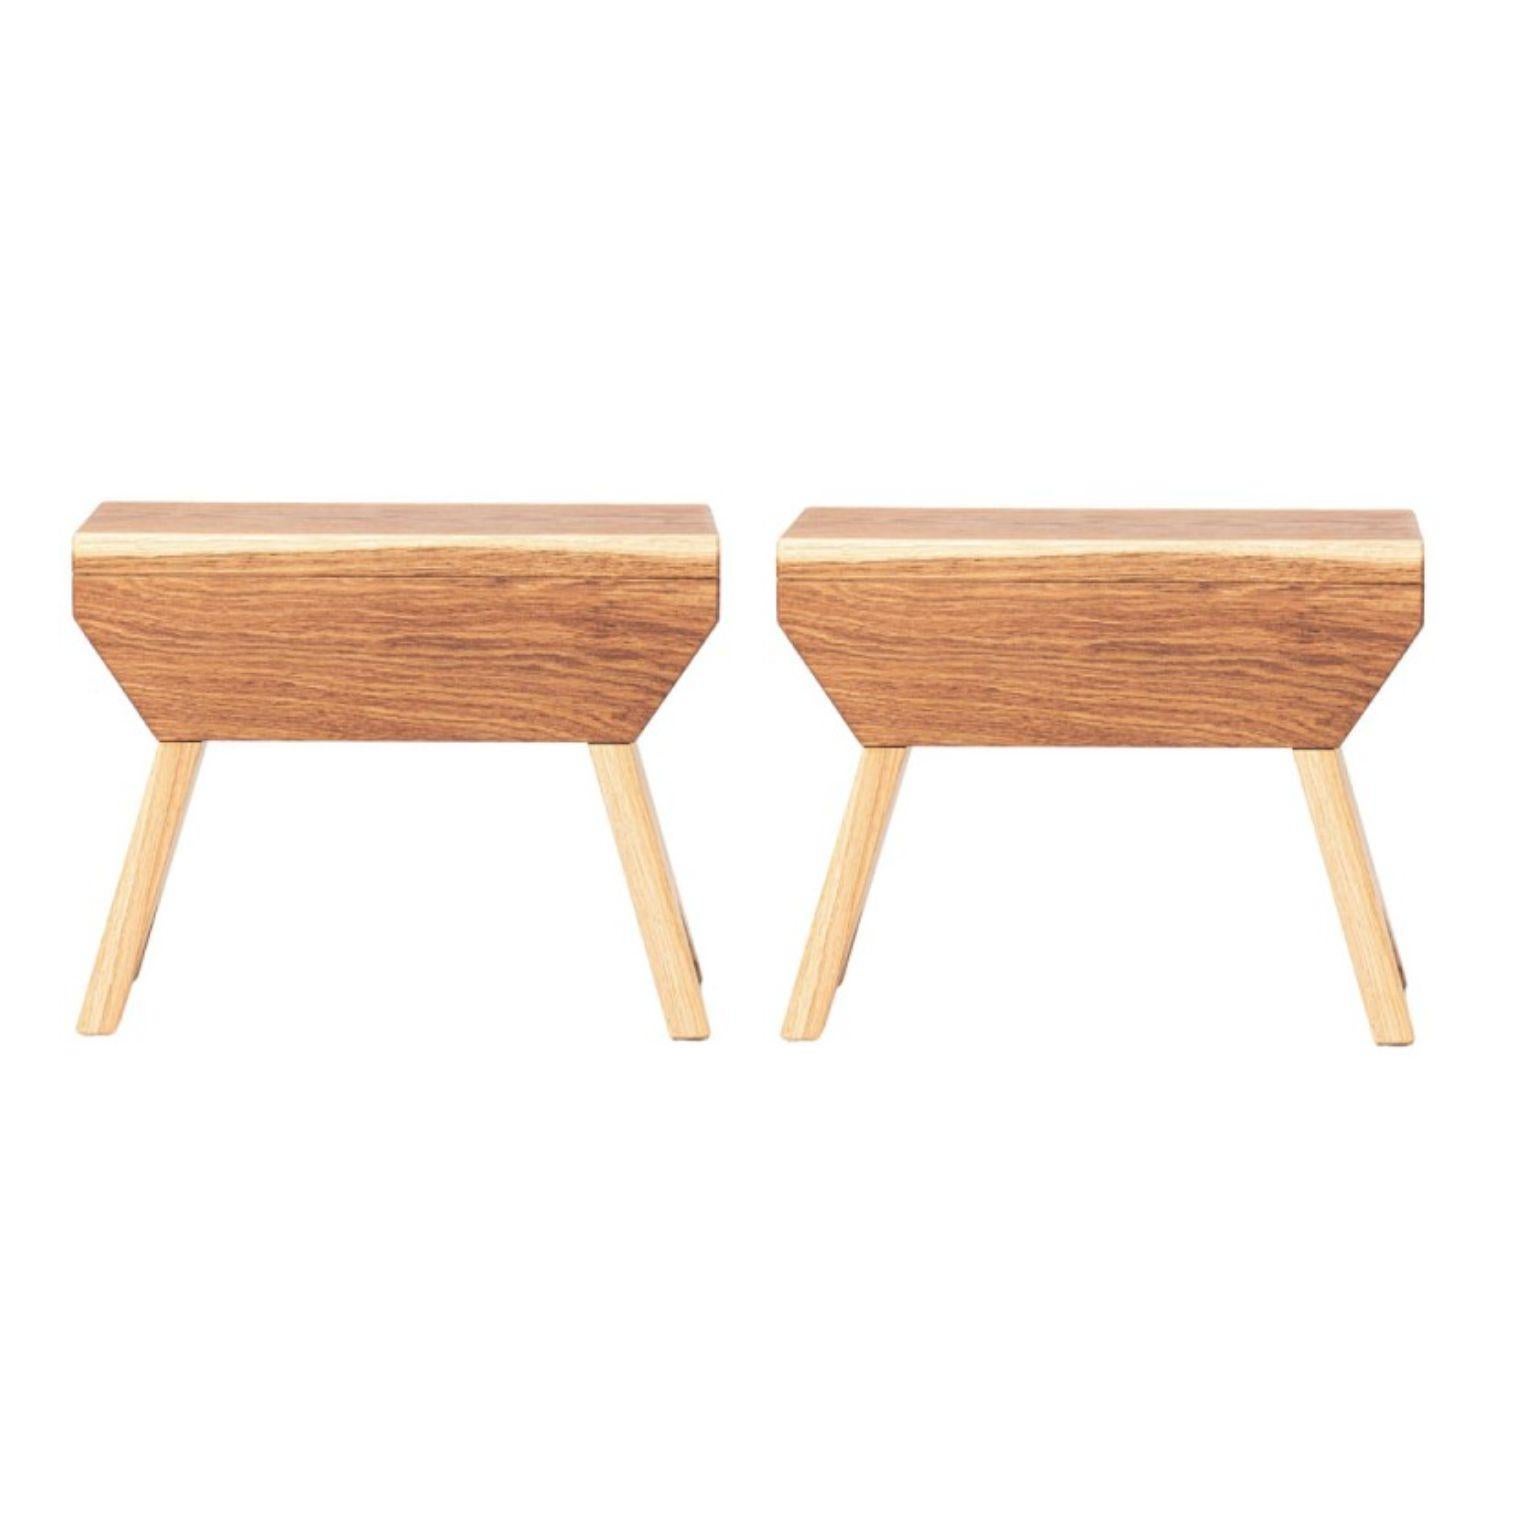 Set of 2 Oslinchik 01 Low Stools by Oito
Dimensions: D21 x W38 x H30 cm
Materials: Oak wood, wax or paint.
Weight: 4 kg
Also Available in different colours.

Wooden stools are a trend for environmental friendliness and home comfort. We try to